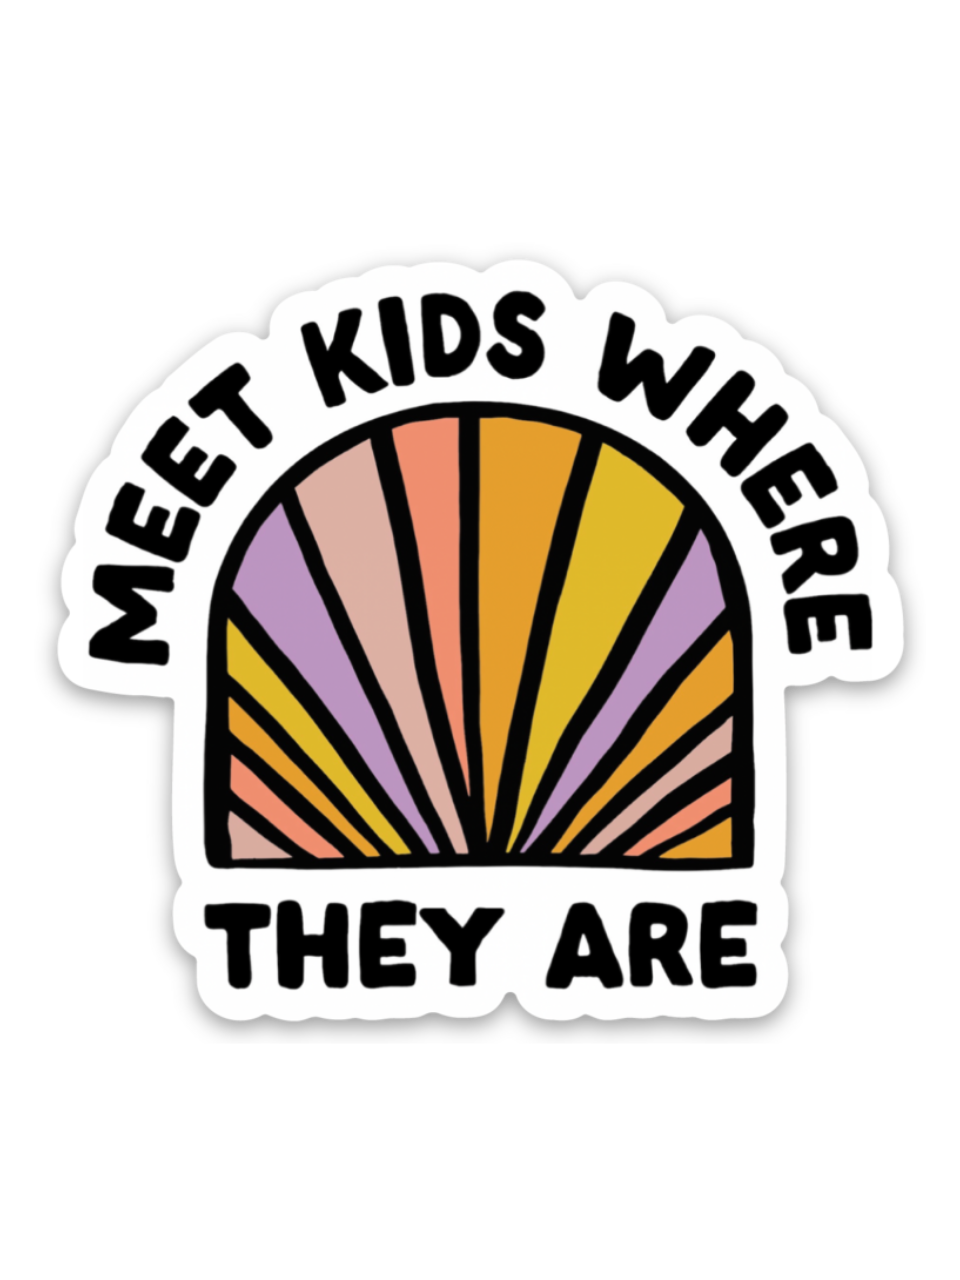 Meet Kids Where They Are Sticker